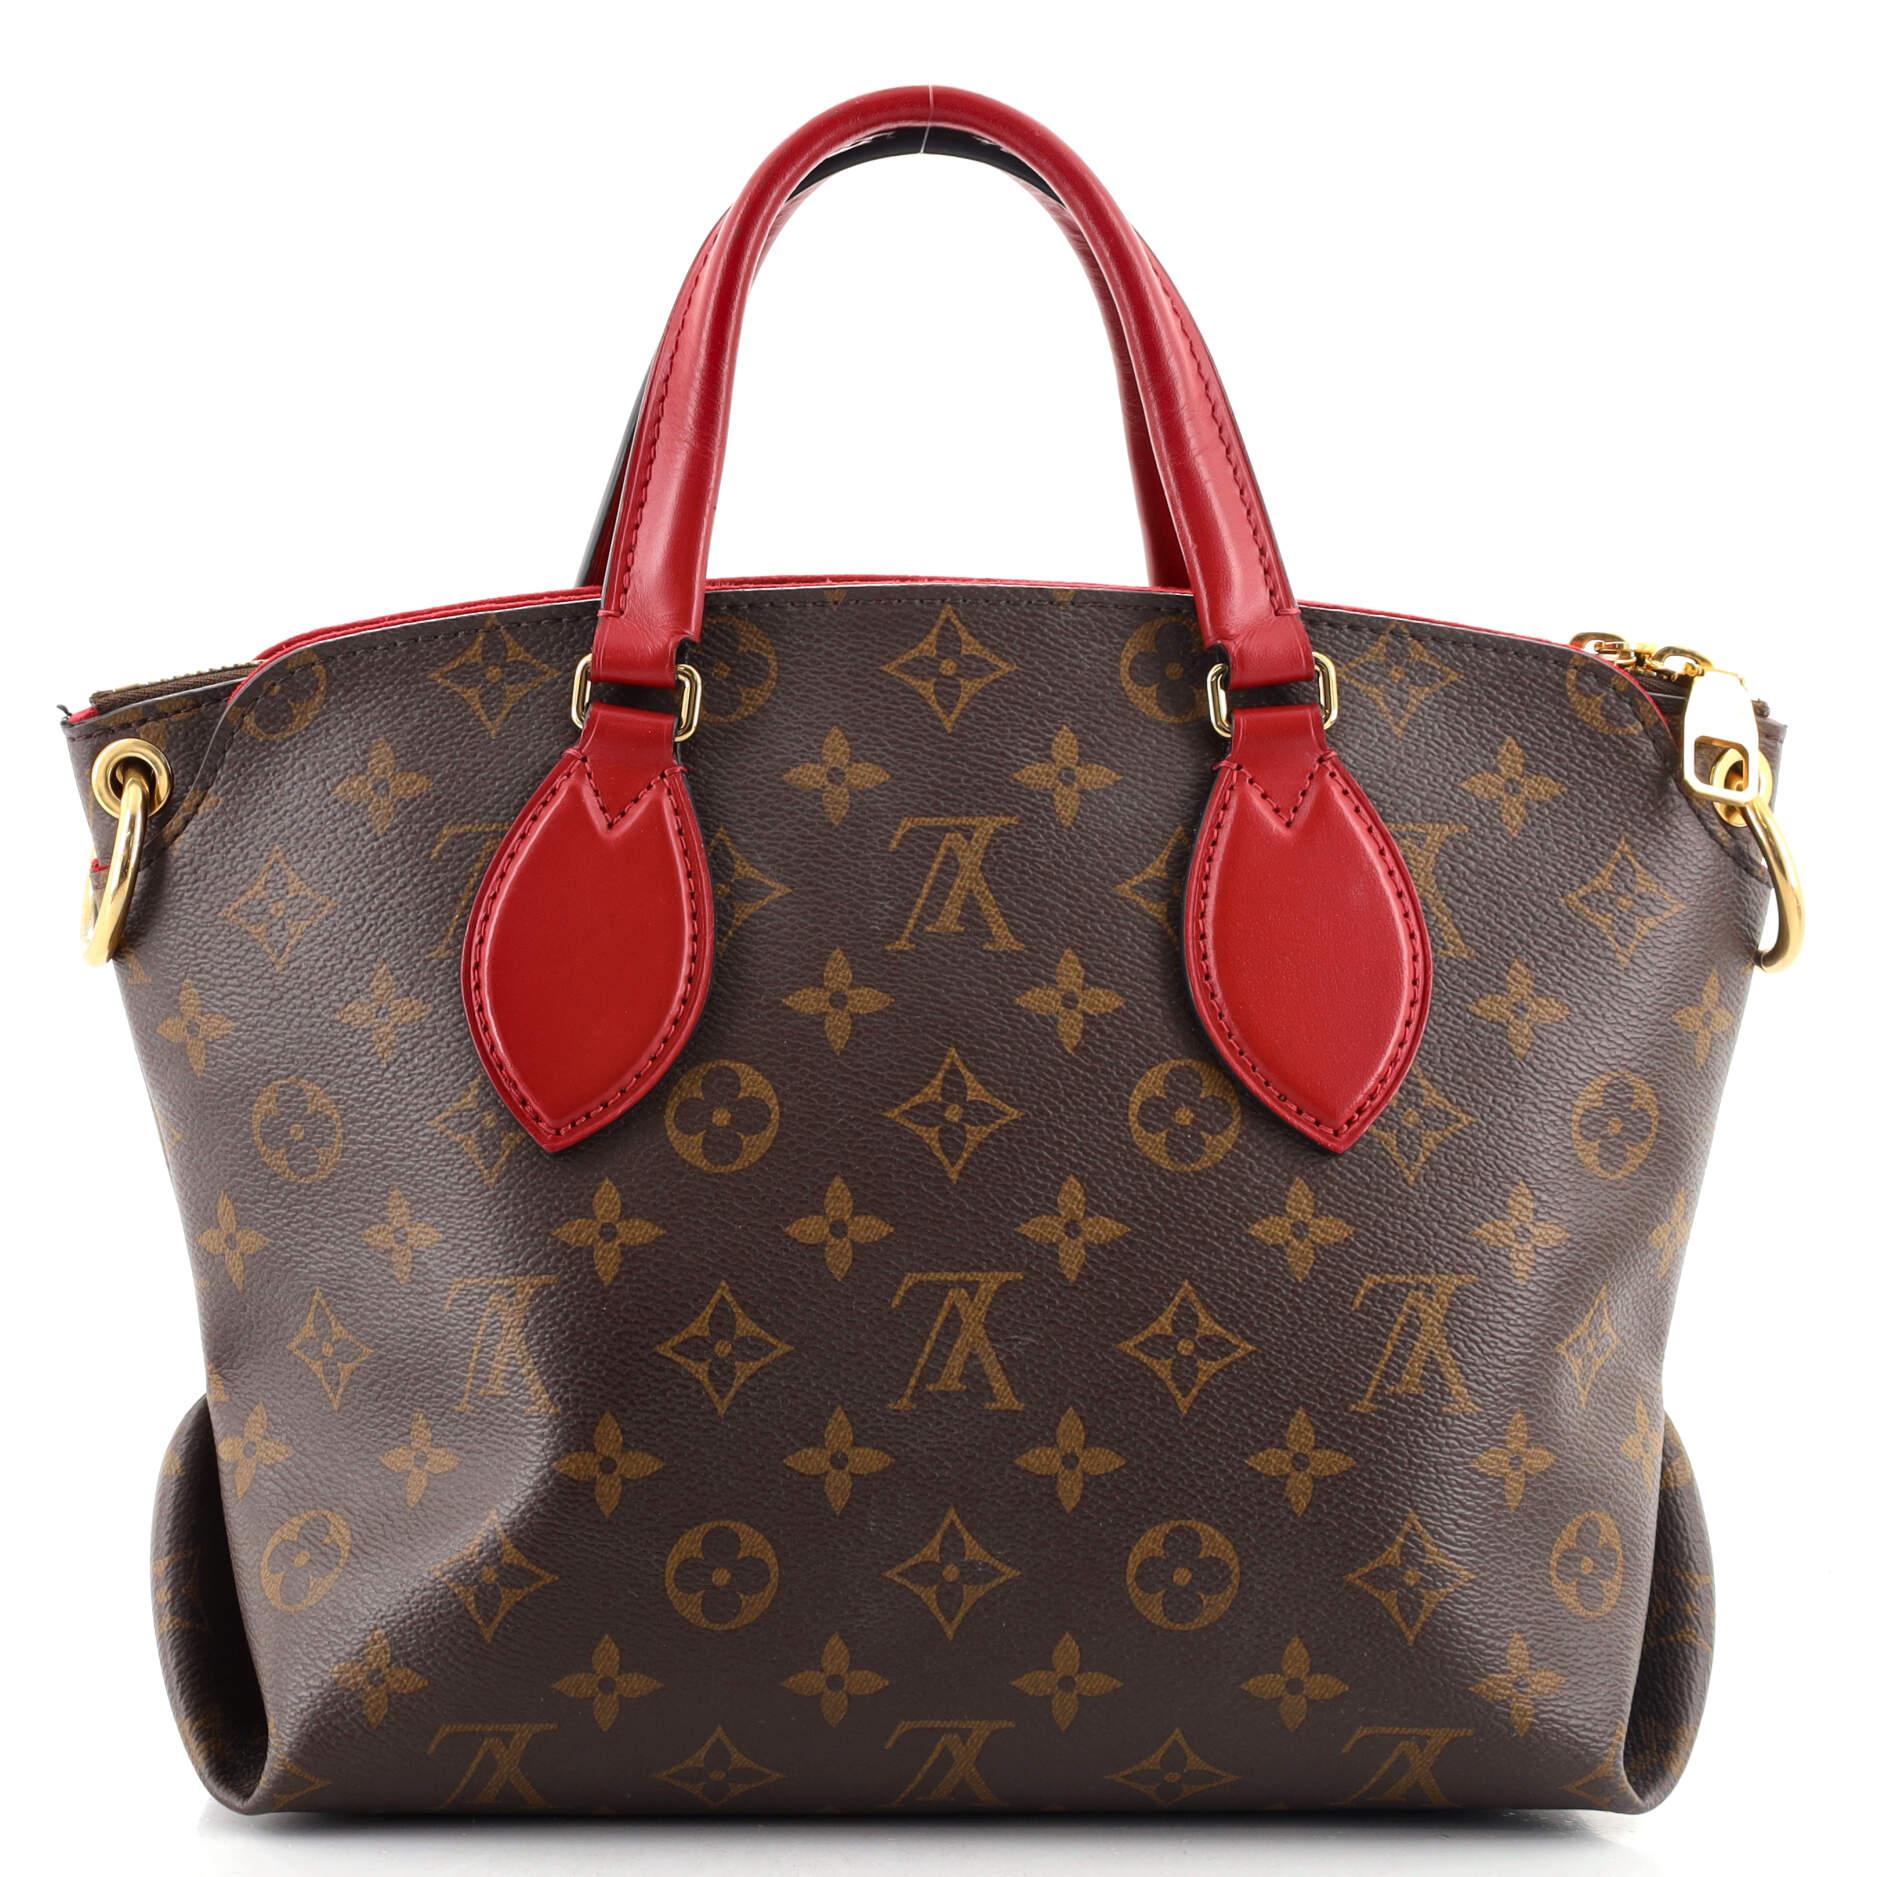 louis vuitton purse with red strap